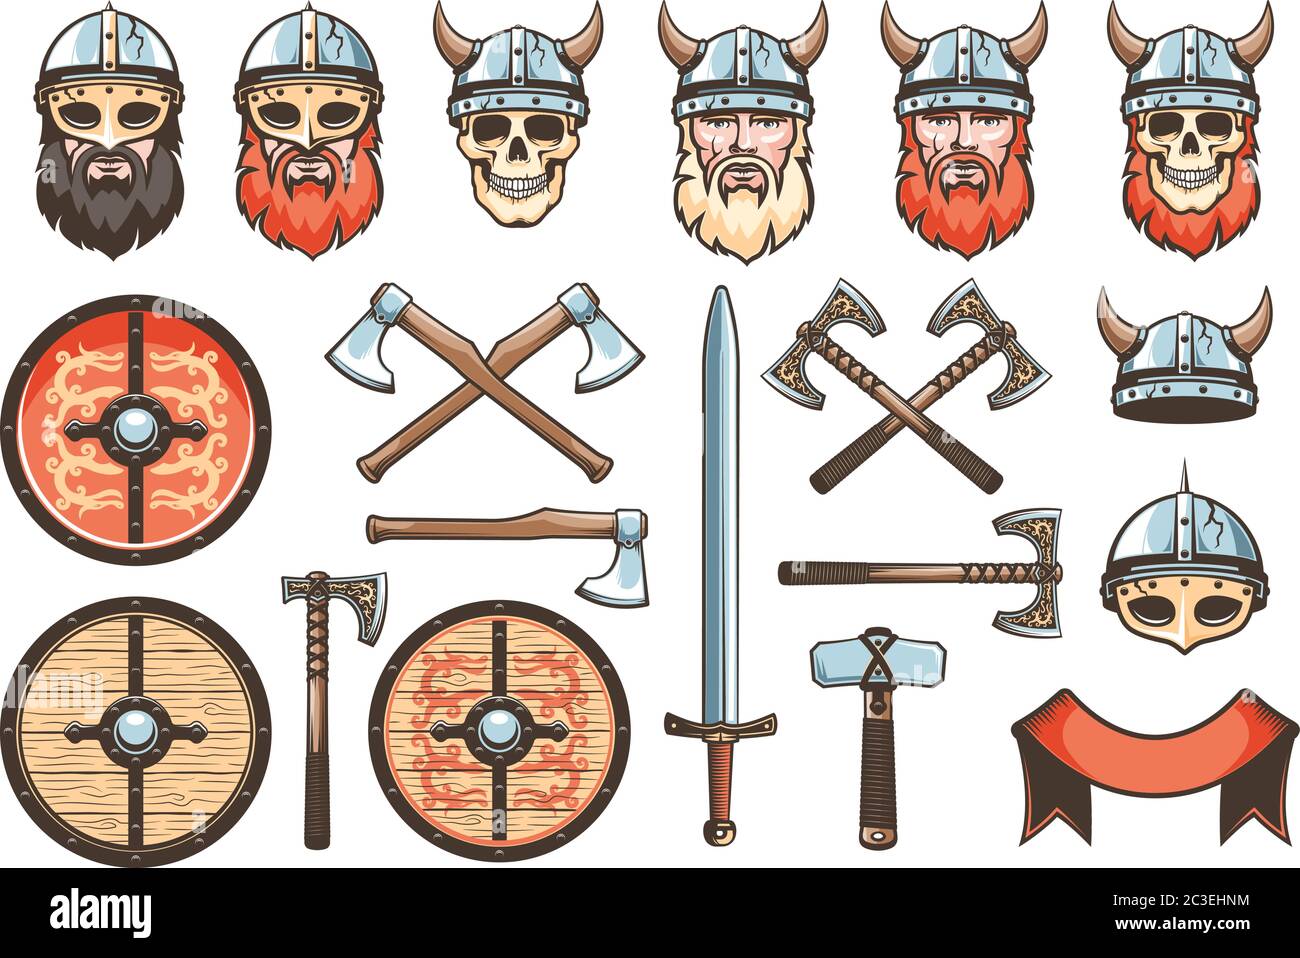 Medieval weapons and armor of Vikings and Knights Stock Vector